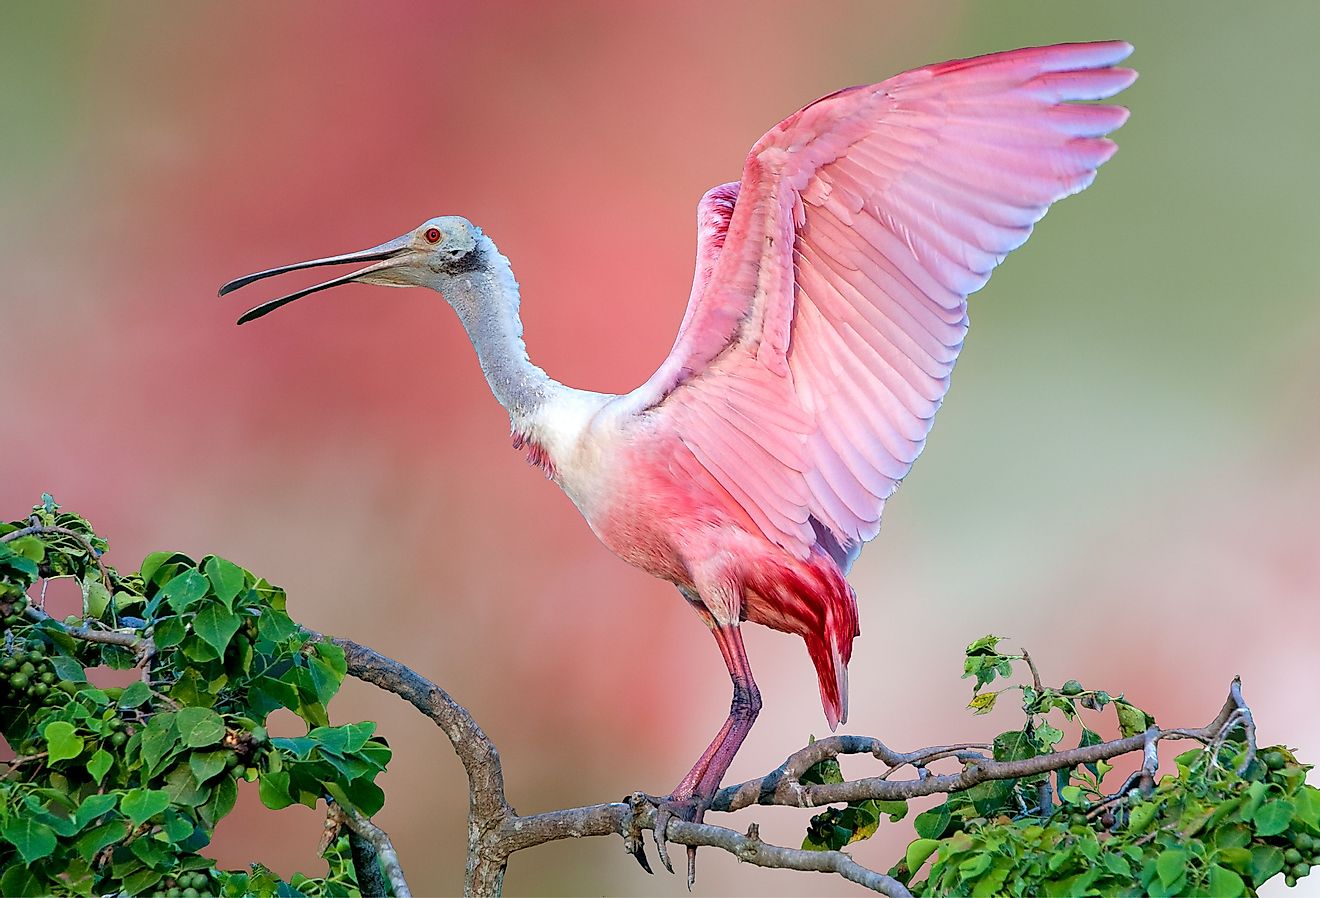 Roseate Spoonbill with wings outstretched.